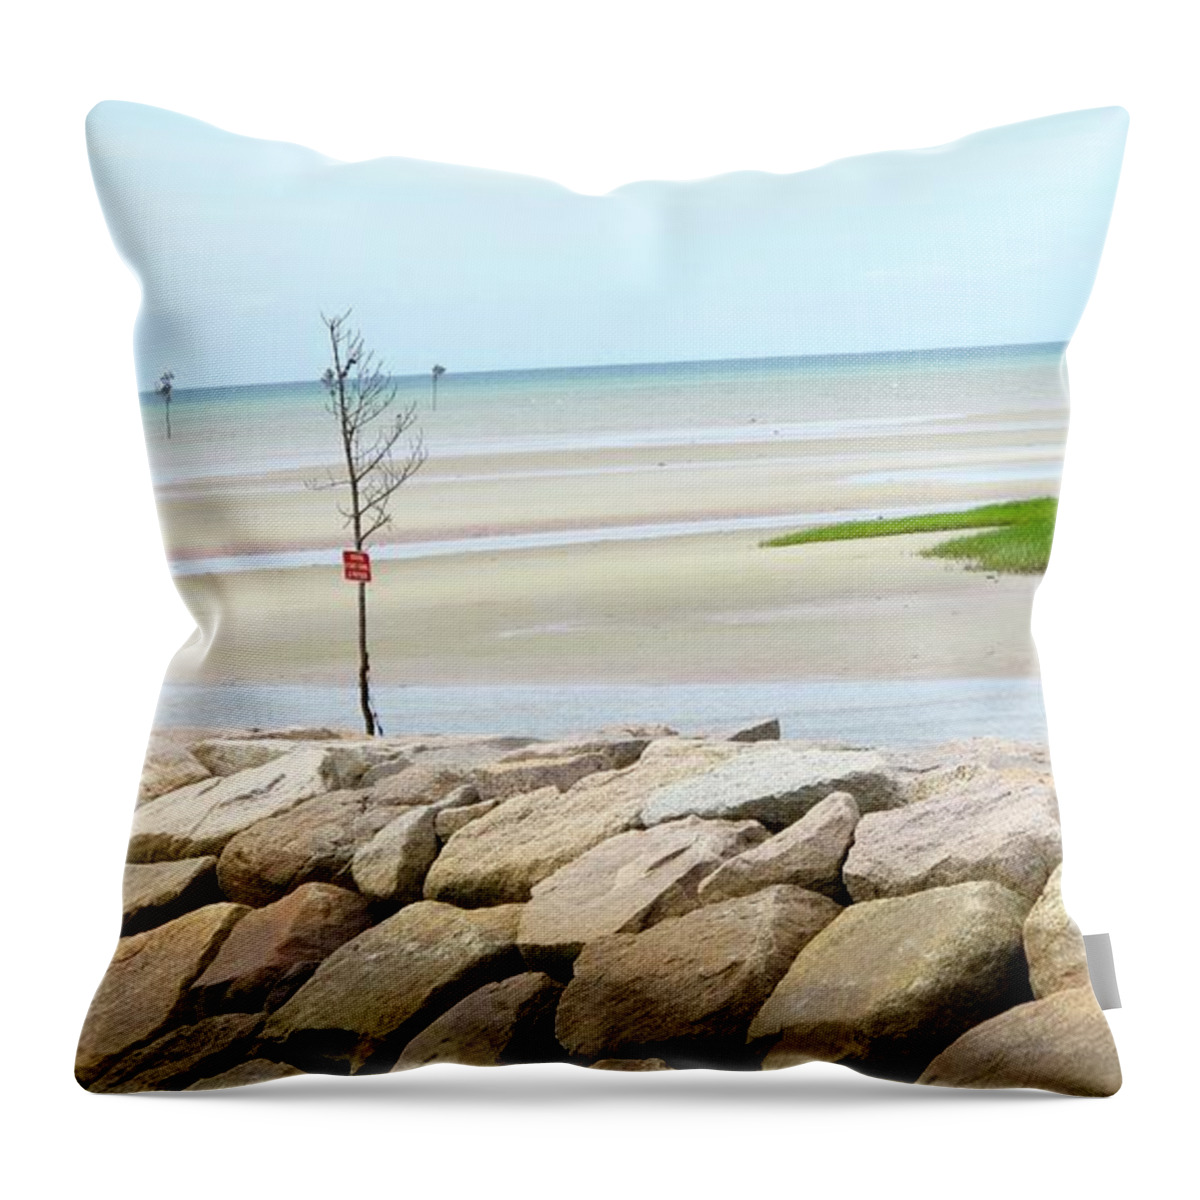 Cape Cod Beach Throw Pillow featuring the photograph Lone Tree On Beac by Sue Morris